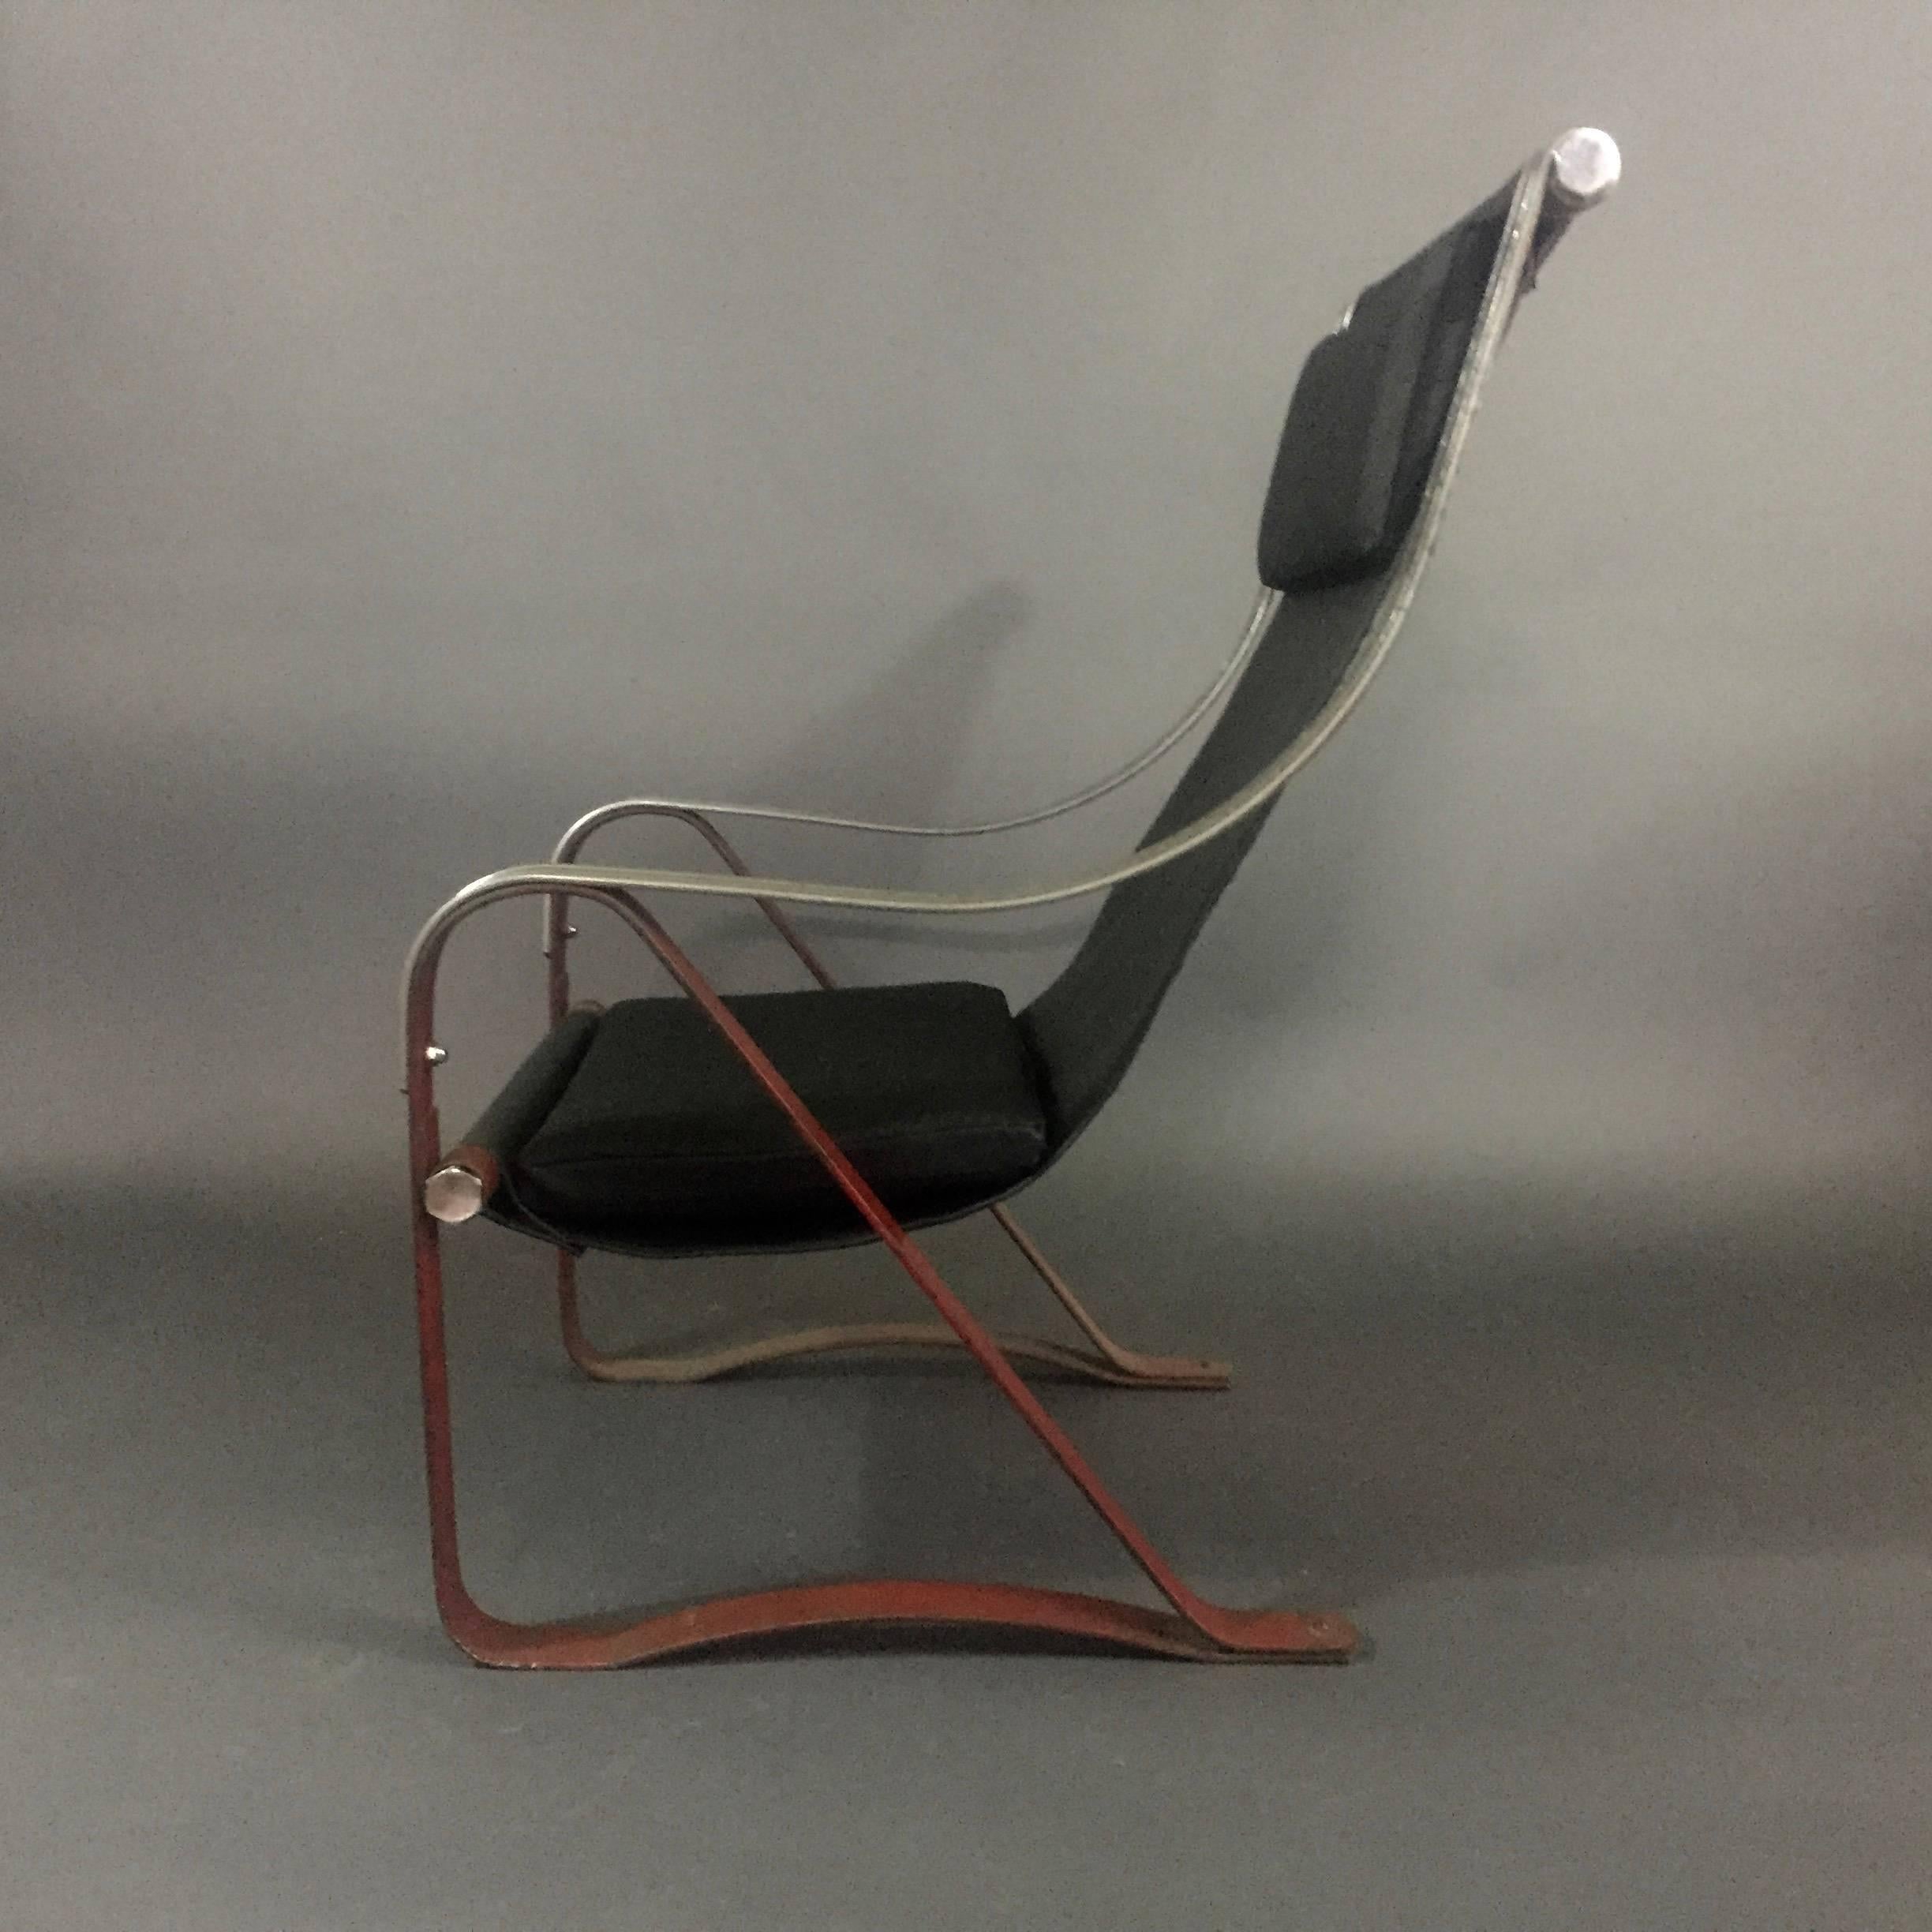 John McKay designed this sling lounge chair for the 1933 World’s Fair in Chicago Hall of Science - highlighting the new Machine Age furniture with chromium-plated steel. This sling chair version has original painted green line on arms and red